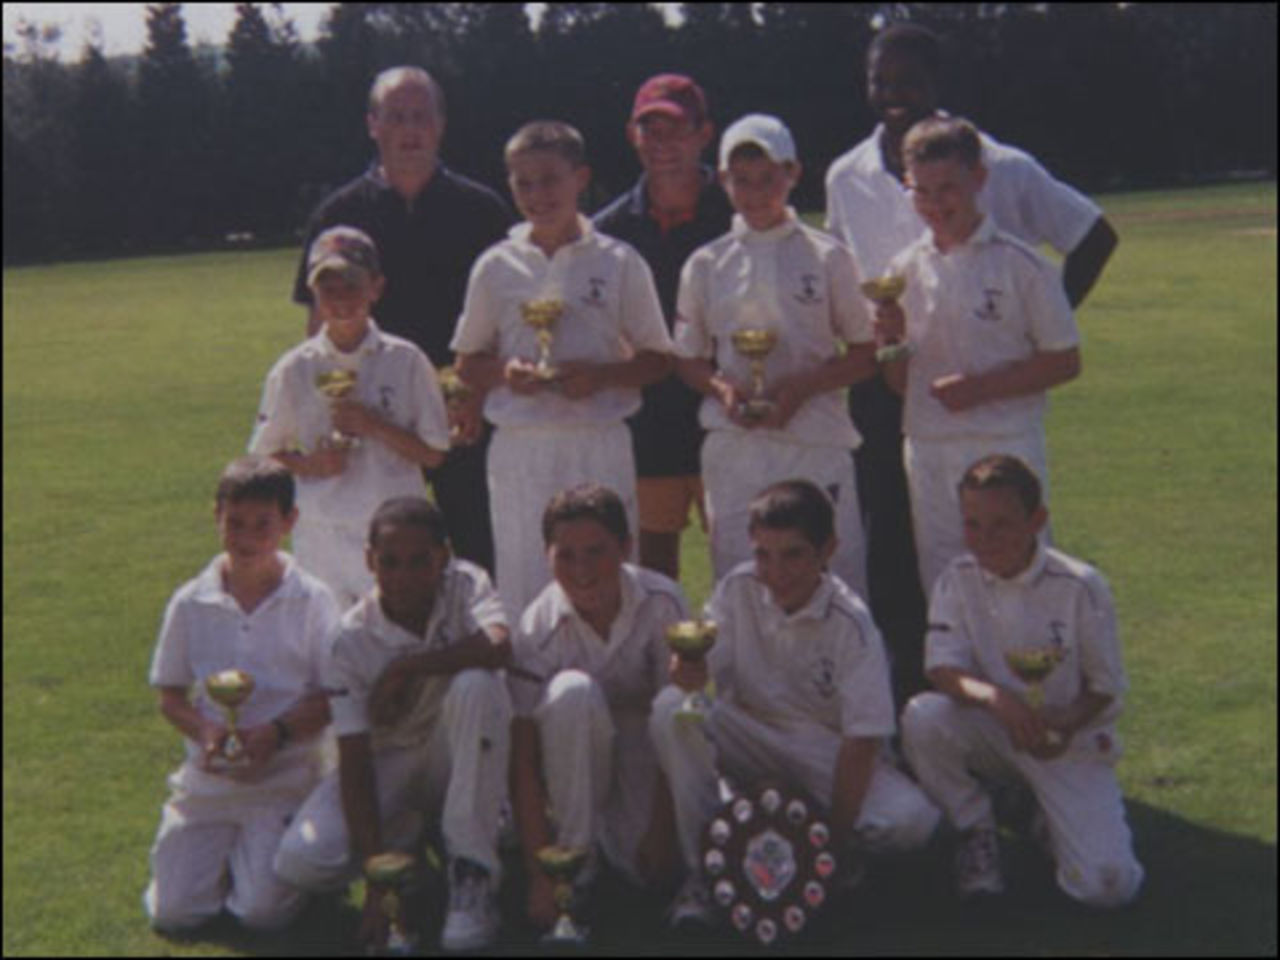 Burnley Under 11s Lancashire Pairs Cup Winners 2002<br>Back row: Peter O`Brien (scorer), Ian Whitehead (manager), Linton Williams (assistant manager)<br>Middle row: Matt Walker, Jack Higgins, Ollie Norwood, Joe Howarth<br>Front row:  Josh Reynolds, Cameron Williams, Johnny O`Brien, Nathan Whitehead (capt), Reece Whitehead